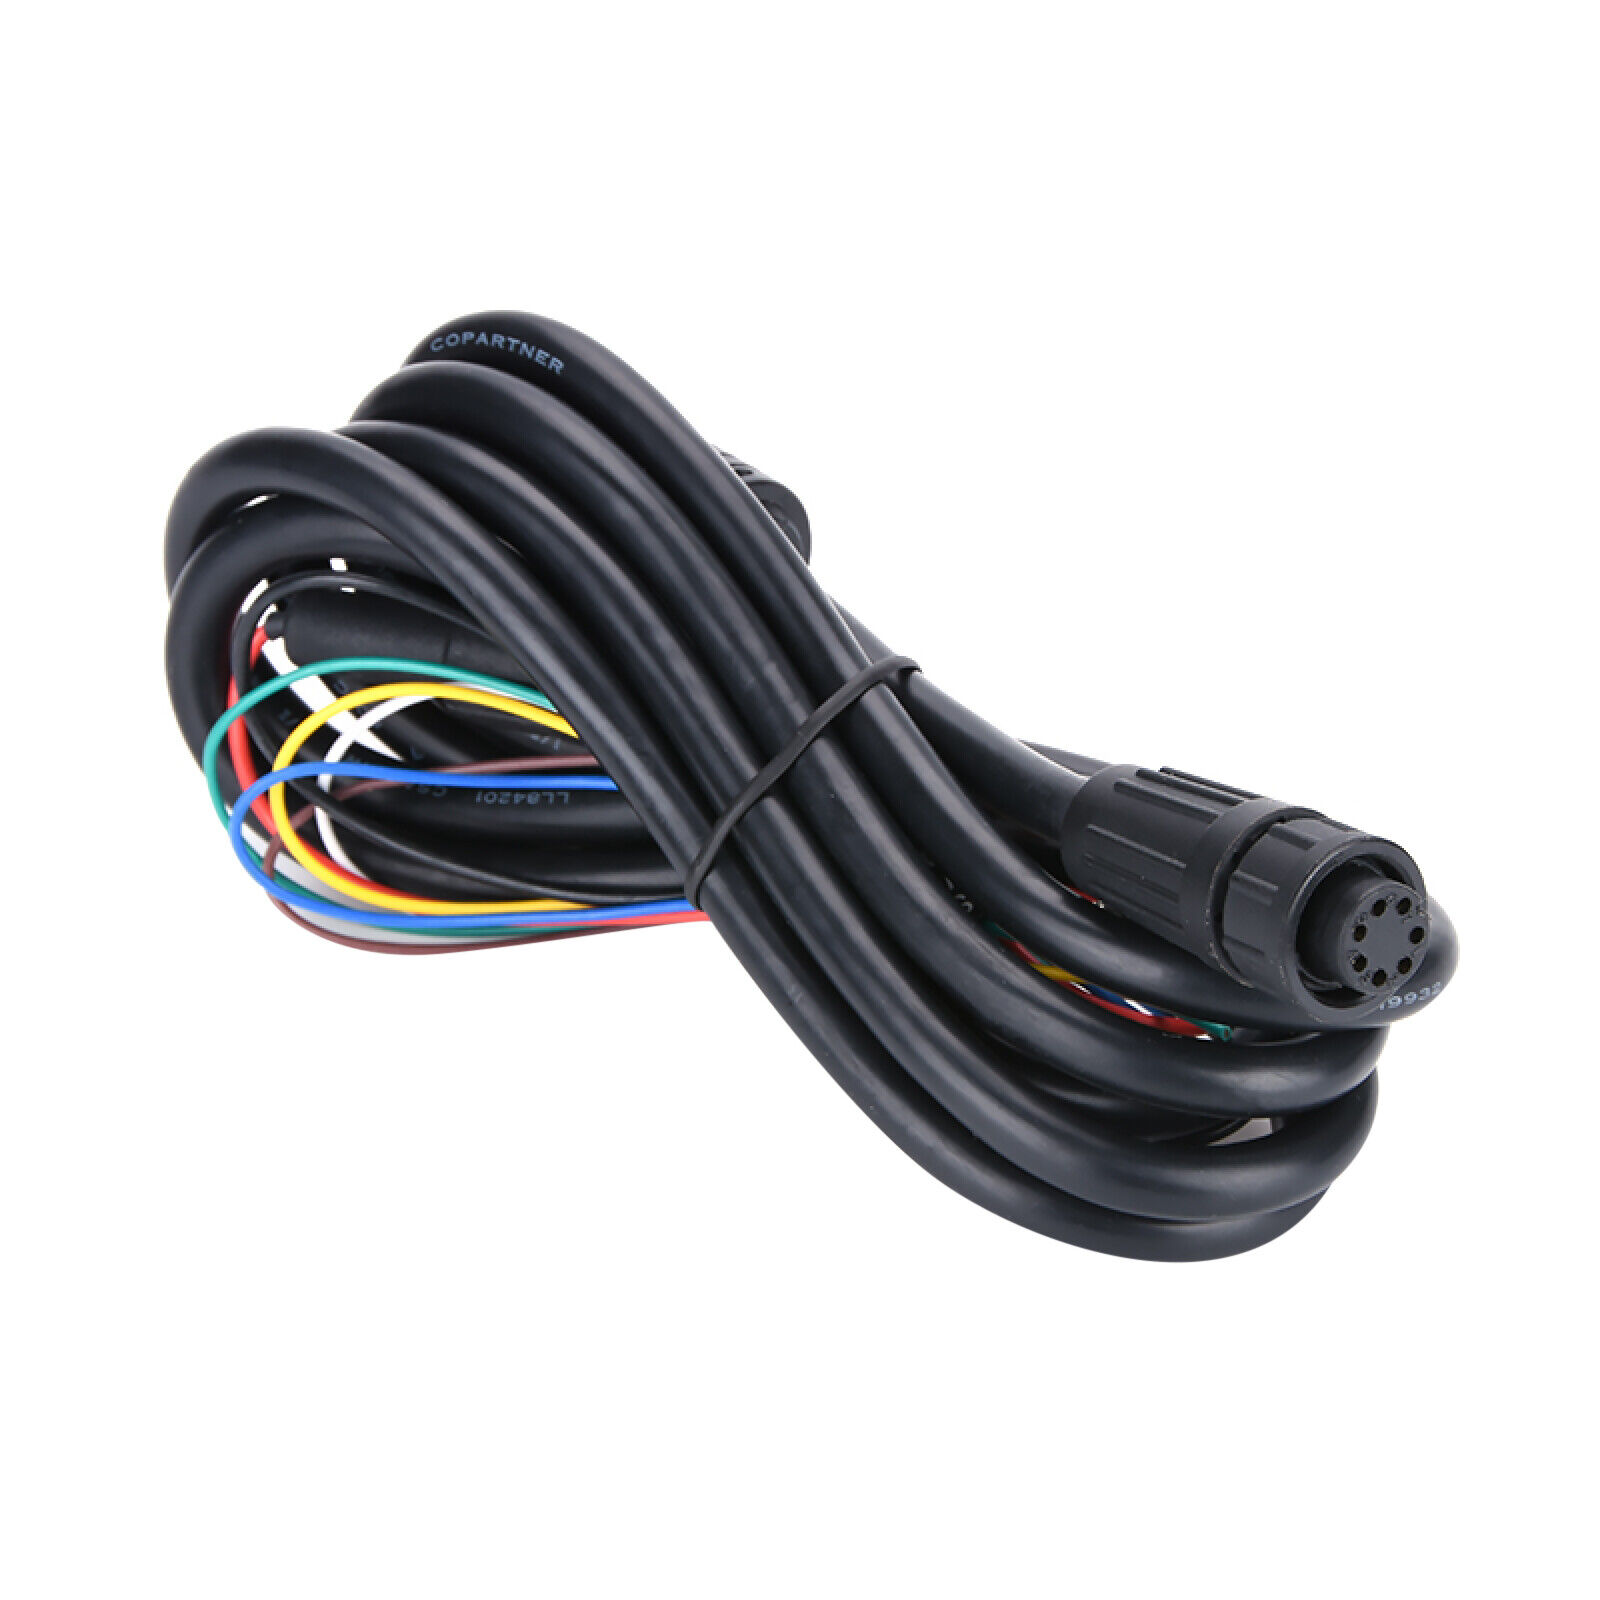 Durable 7-Pin Power Cable For GARMIN POWER CABLE GPSMAP 128 152 192C 580 GPS b